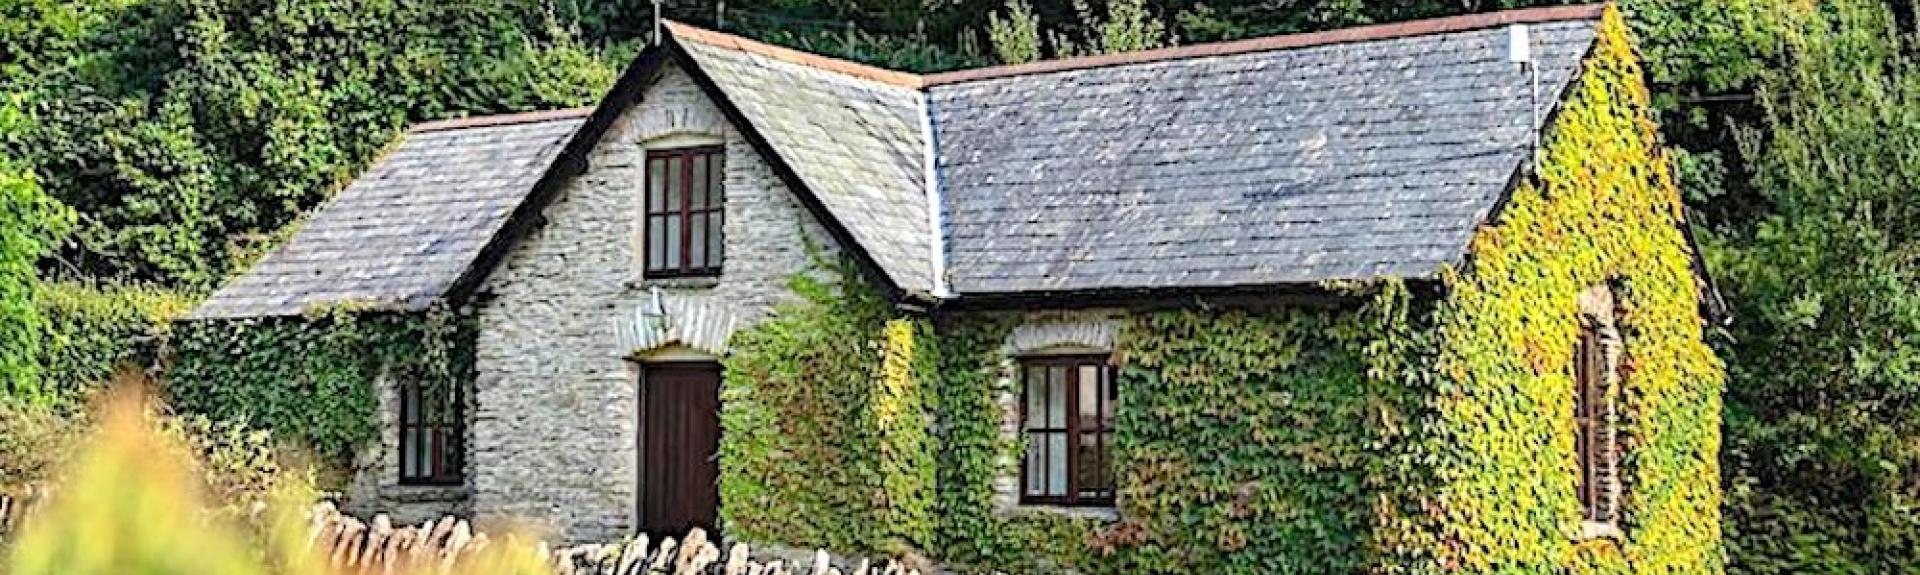 Single-storey, ivy-clad country cottage in front of woodland trees.